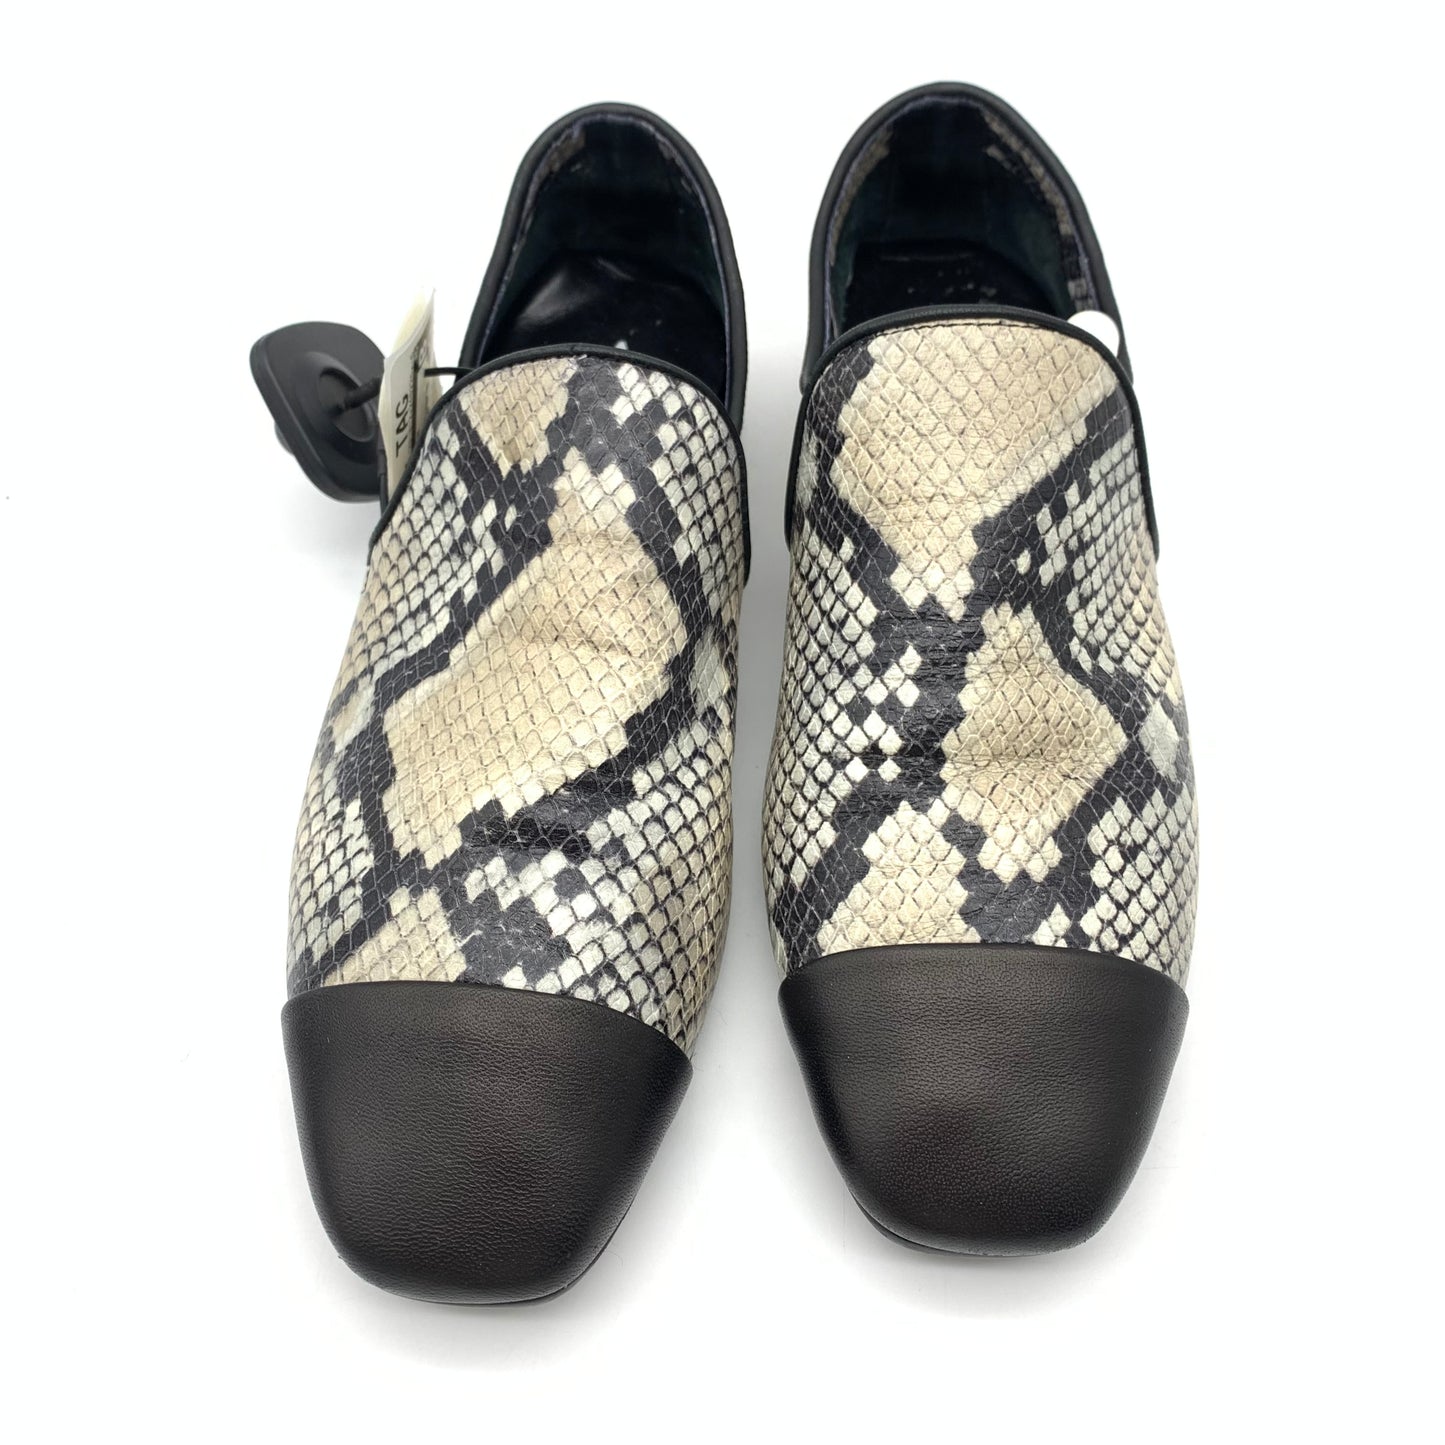 Shoes Flats Other By Aquatalia  Size: 7